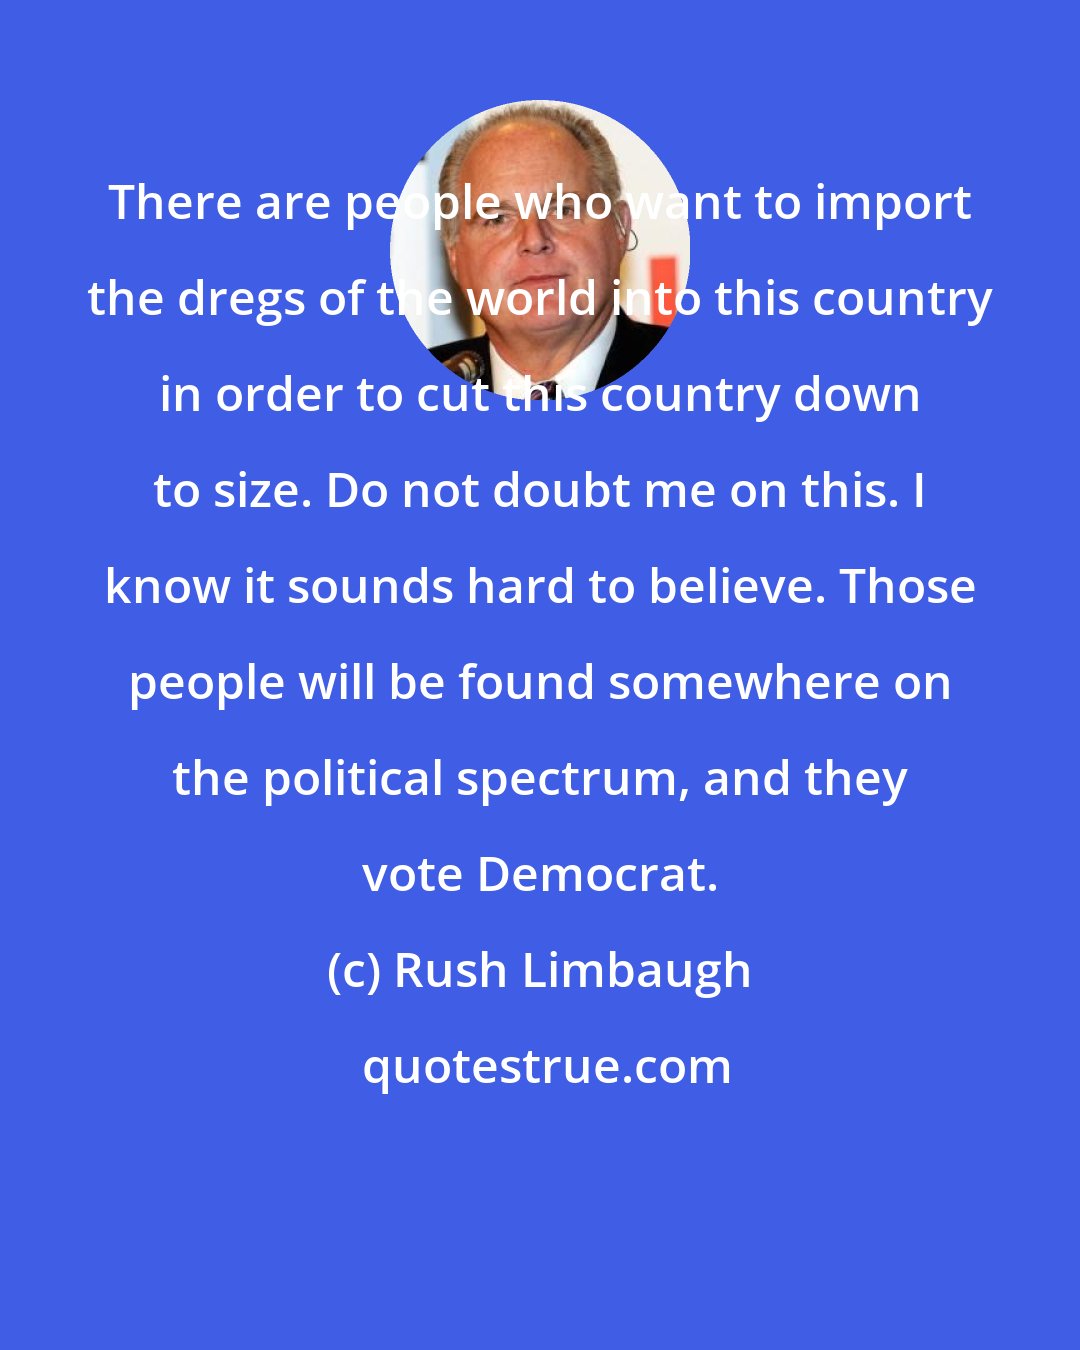 Rush Limbaugh: There are people who want to import the dregs of the world into this country in order to cut this country down to size. Do not doubt me on this. I know it sounds hard to believe. Those people will be found somewhere on the political spectrum, and they vote Democrat.